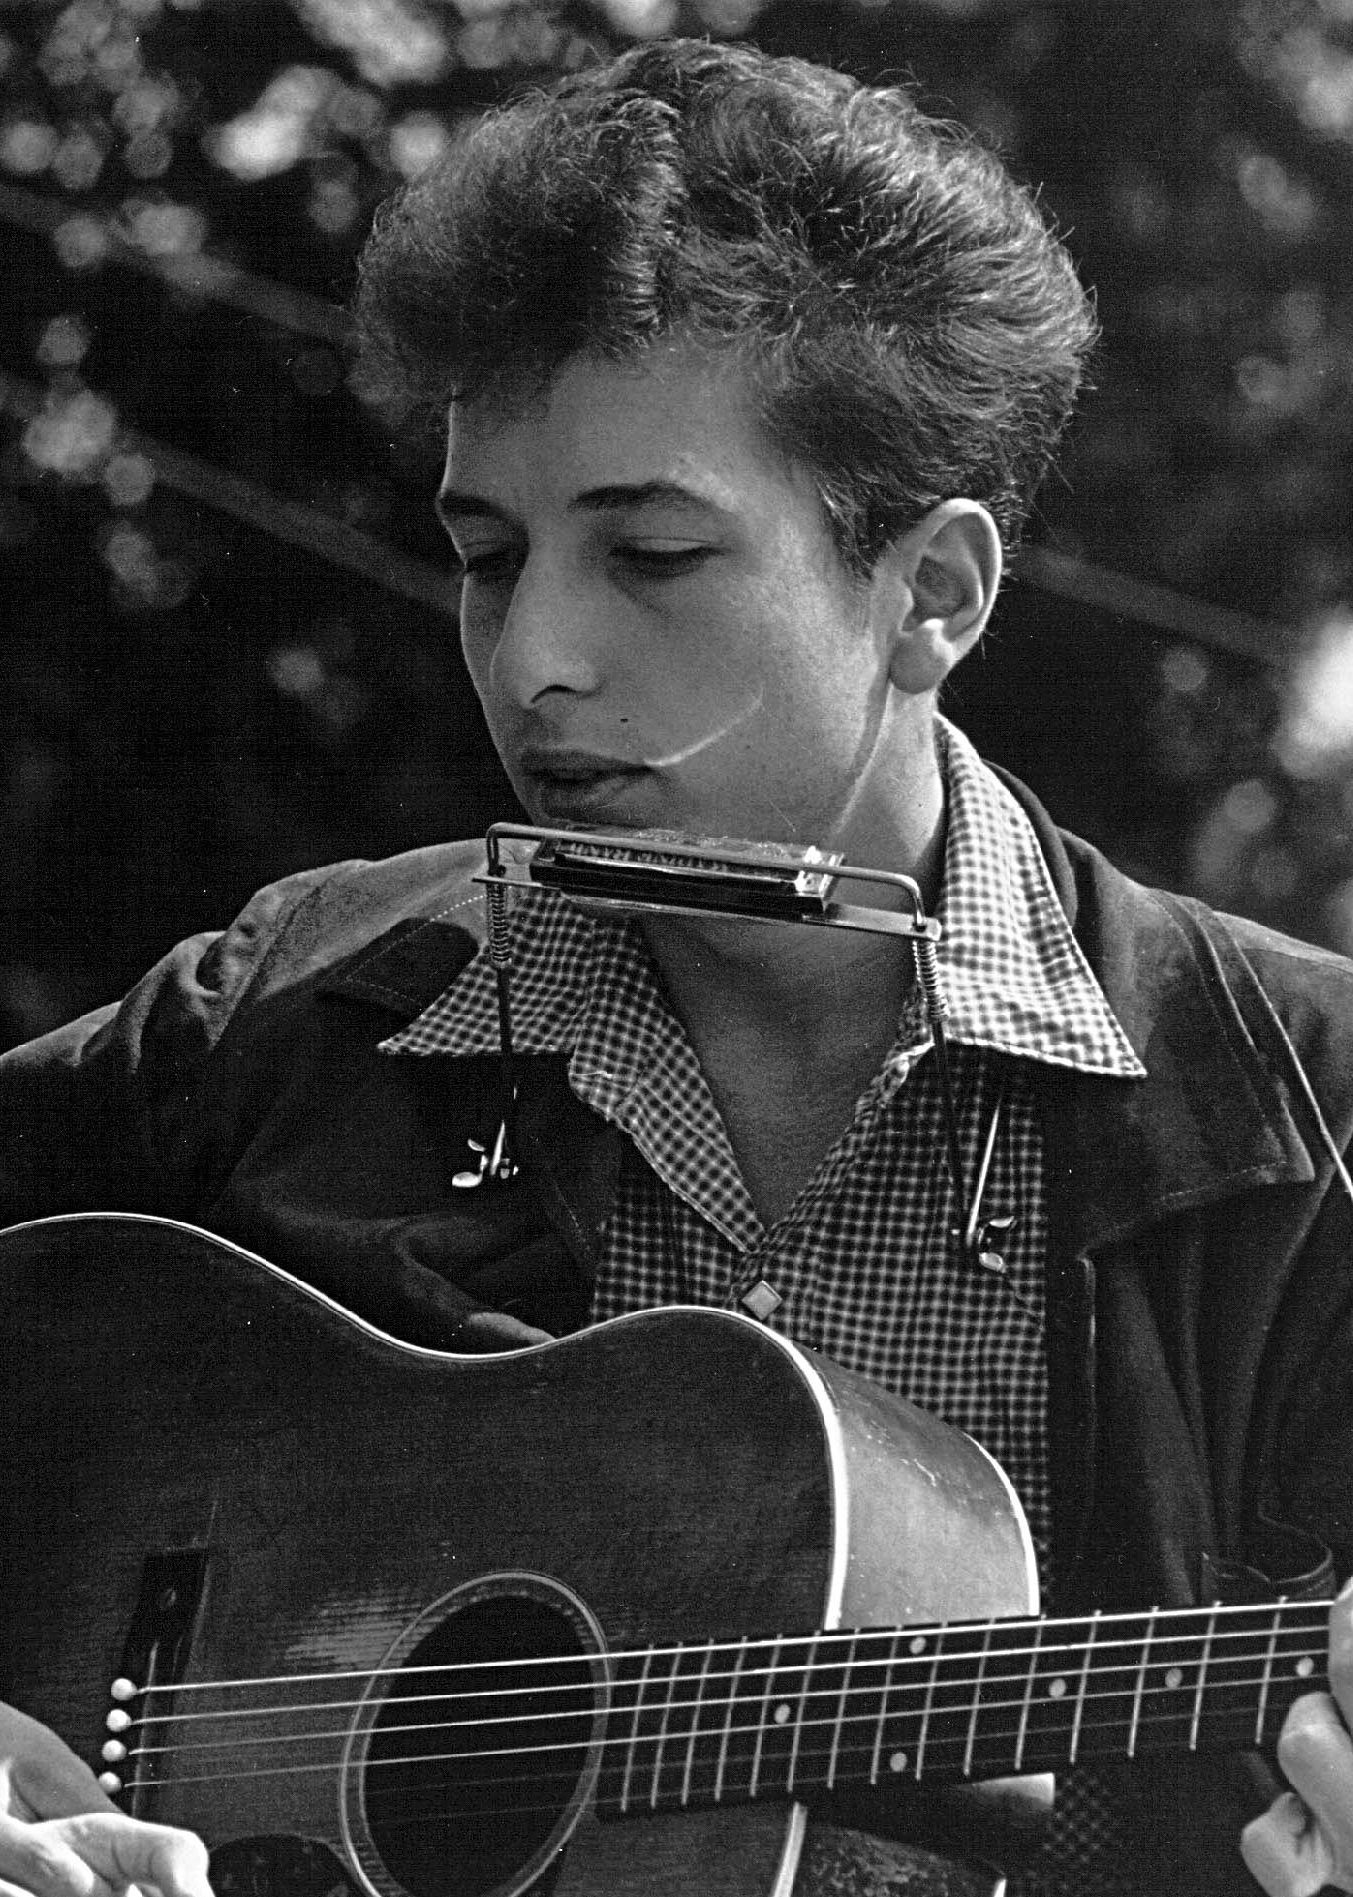 Folk singers Joan Baez and Bob Dylan perform during a civil rights rally on August 28, 1963 in Washington D.C. (Rowland Scherman/National Archive/Newsmakers)